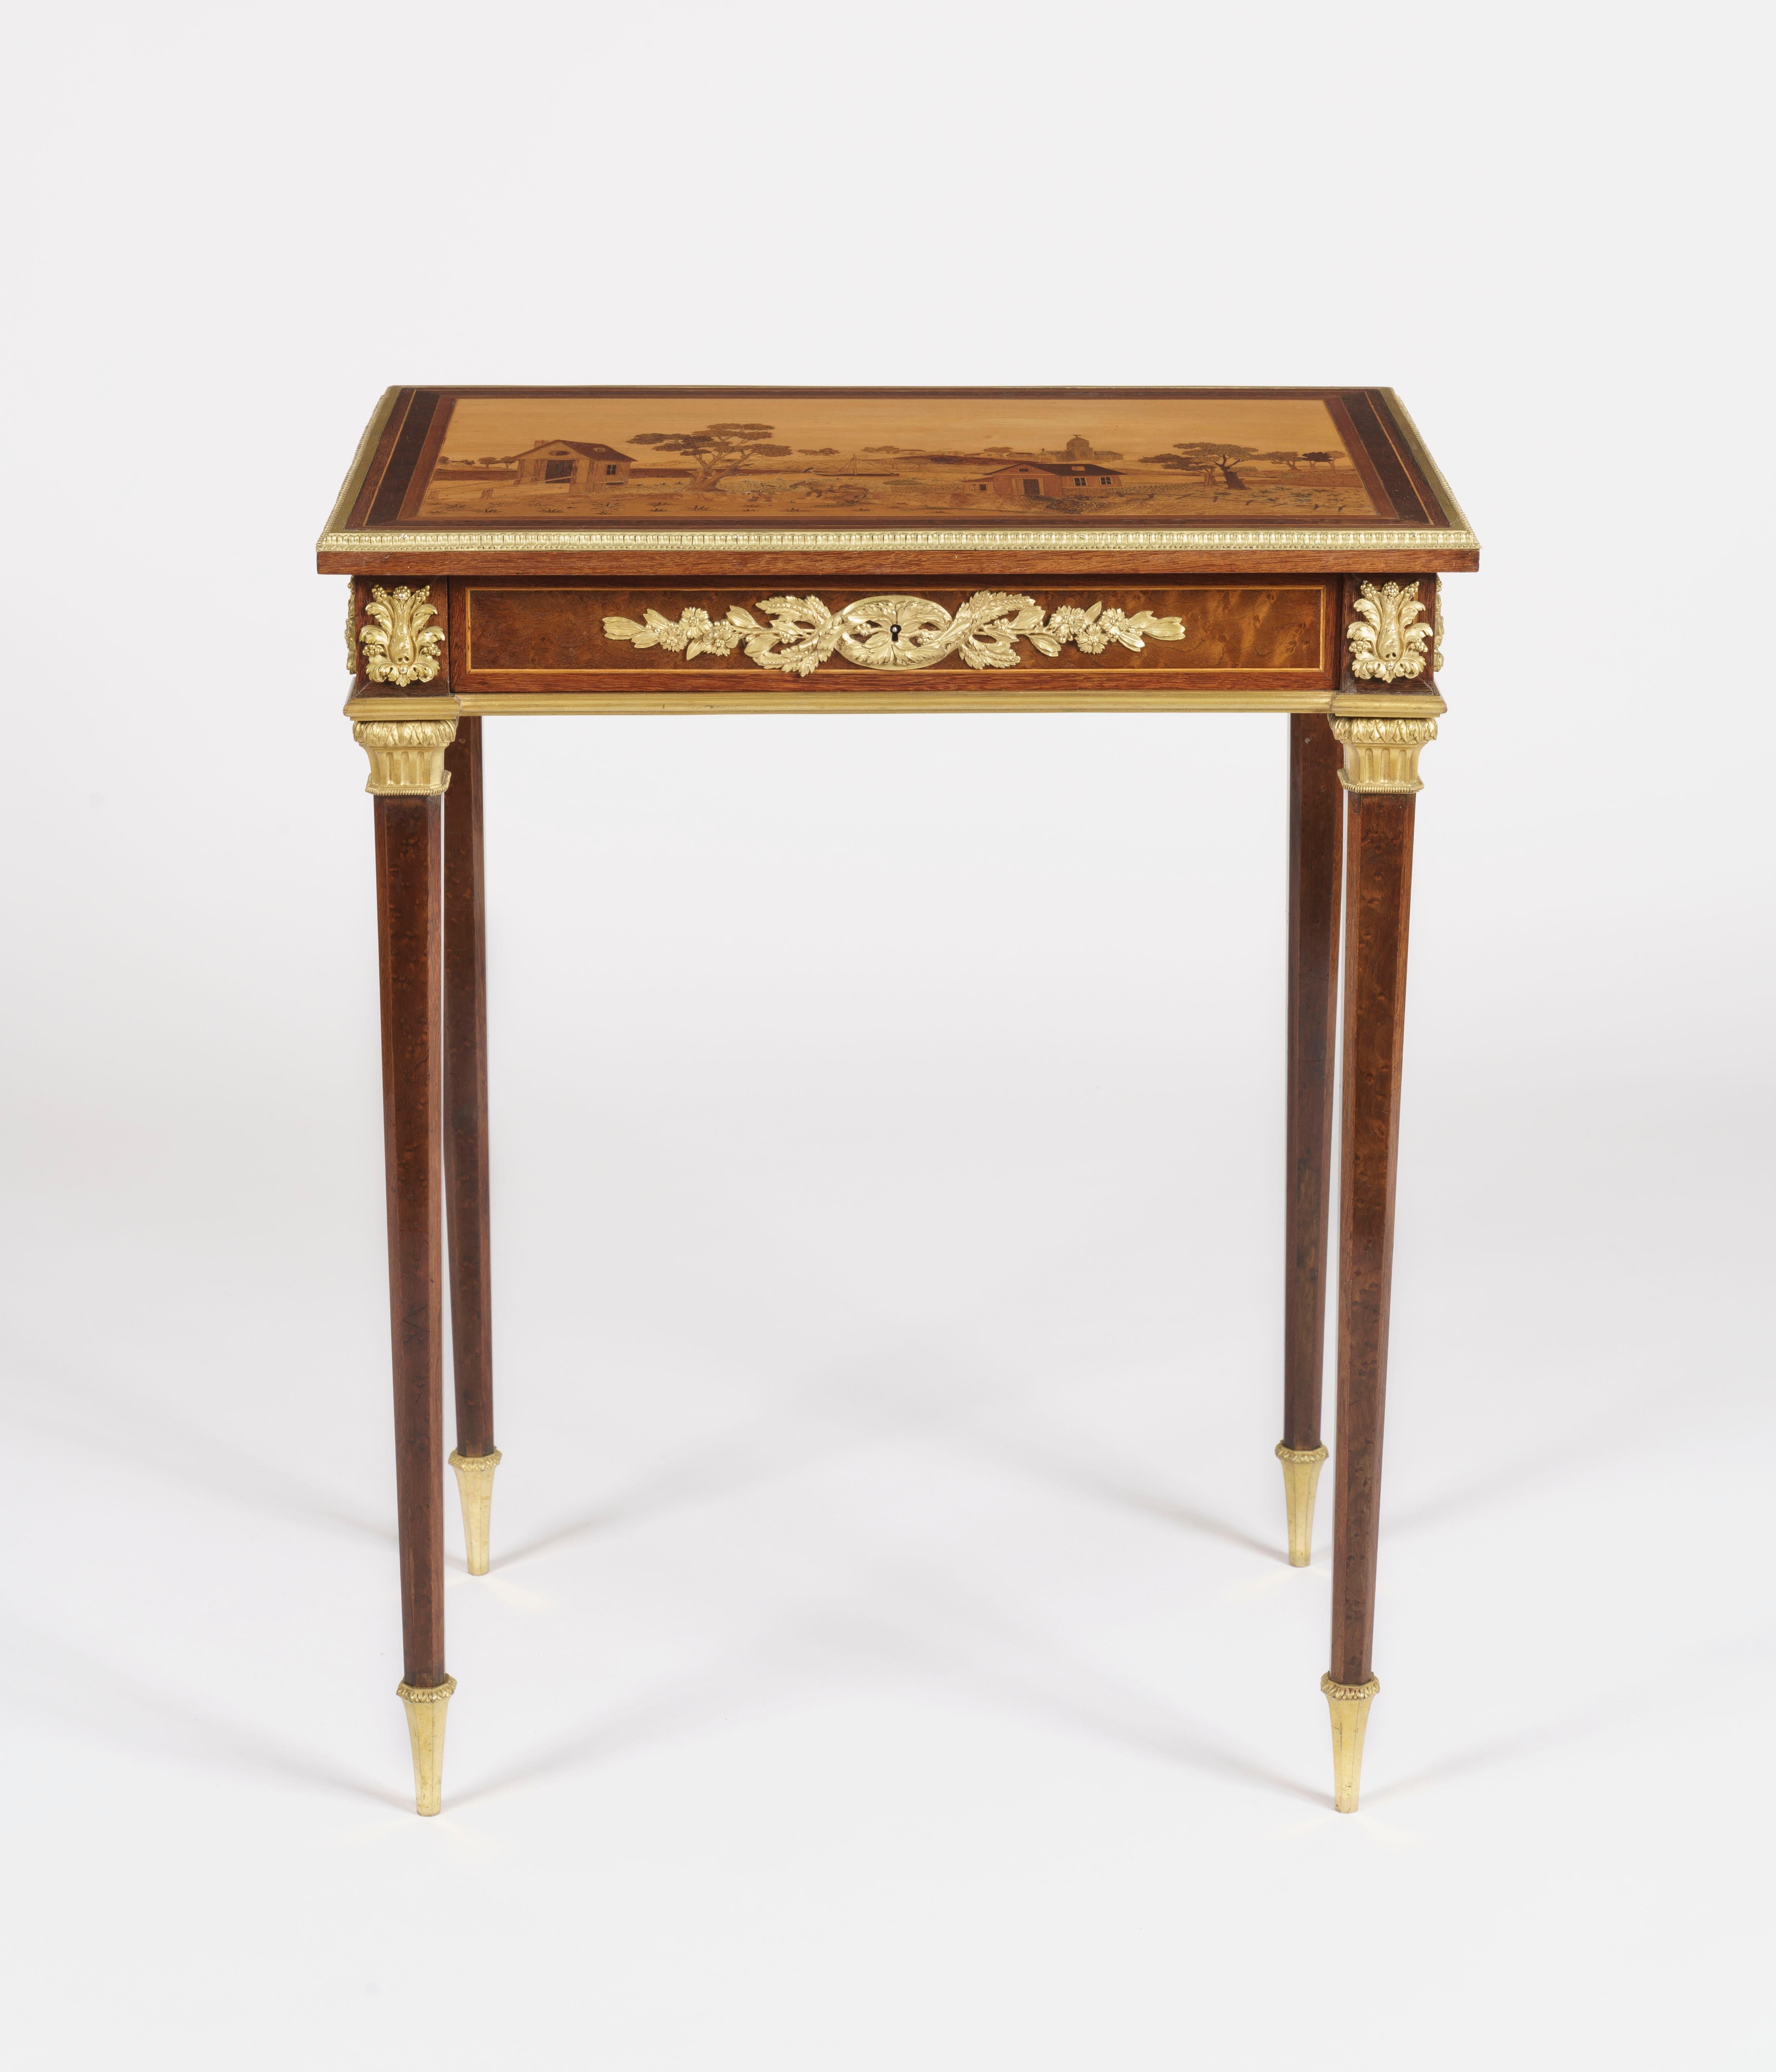 A fine quality side table
In the manner of Charles Topino

Of rectangular form, constructed in various specimen woods including thuya, walnut, boxwood, and yew, and having ormolu bronze adornments; rising from tapering octagonal legs and having